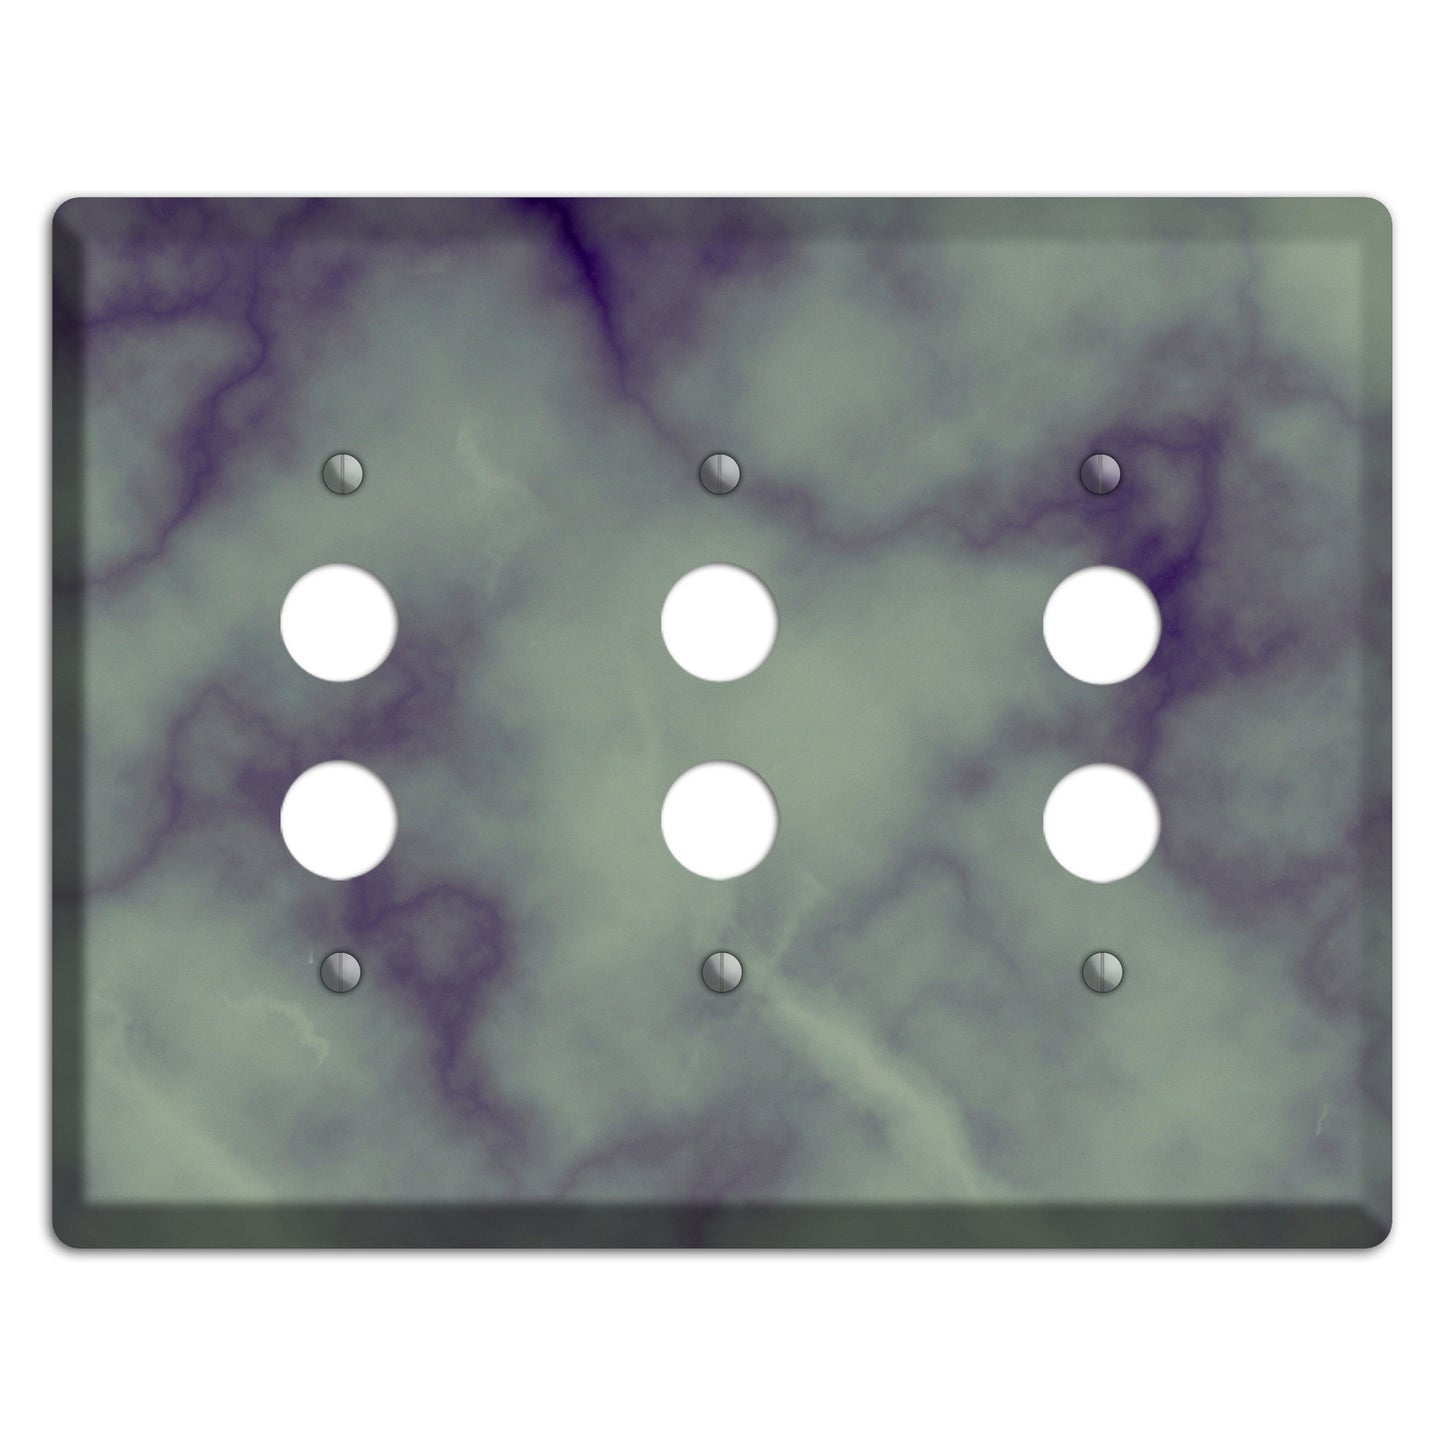 Mid Gray Marble 3 Pushbutton Wallplate